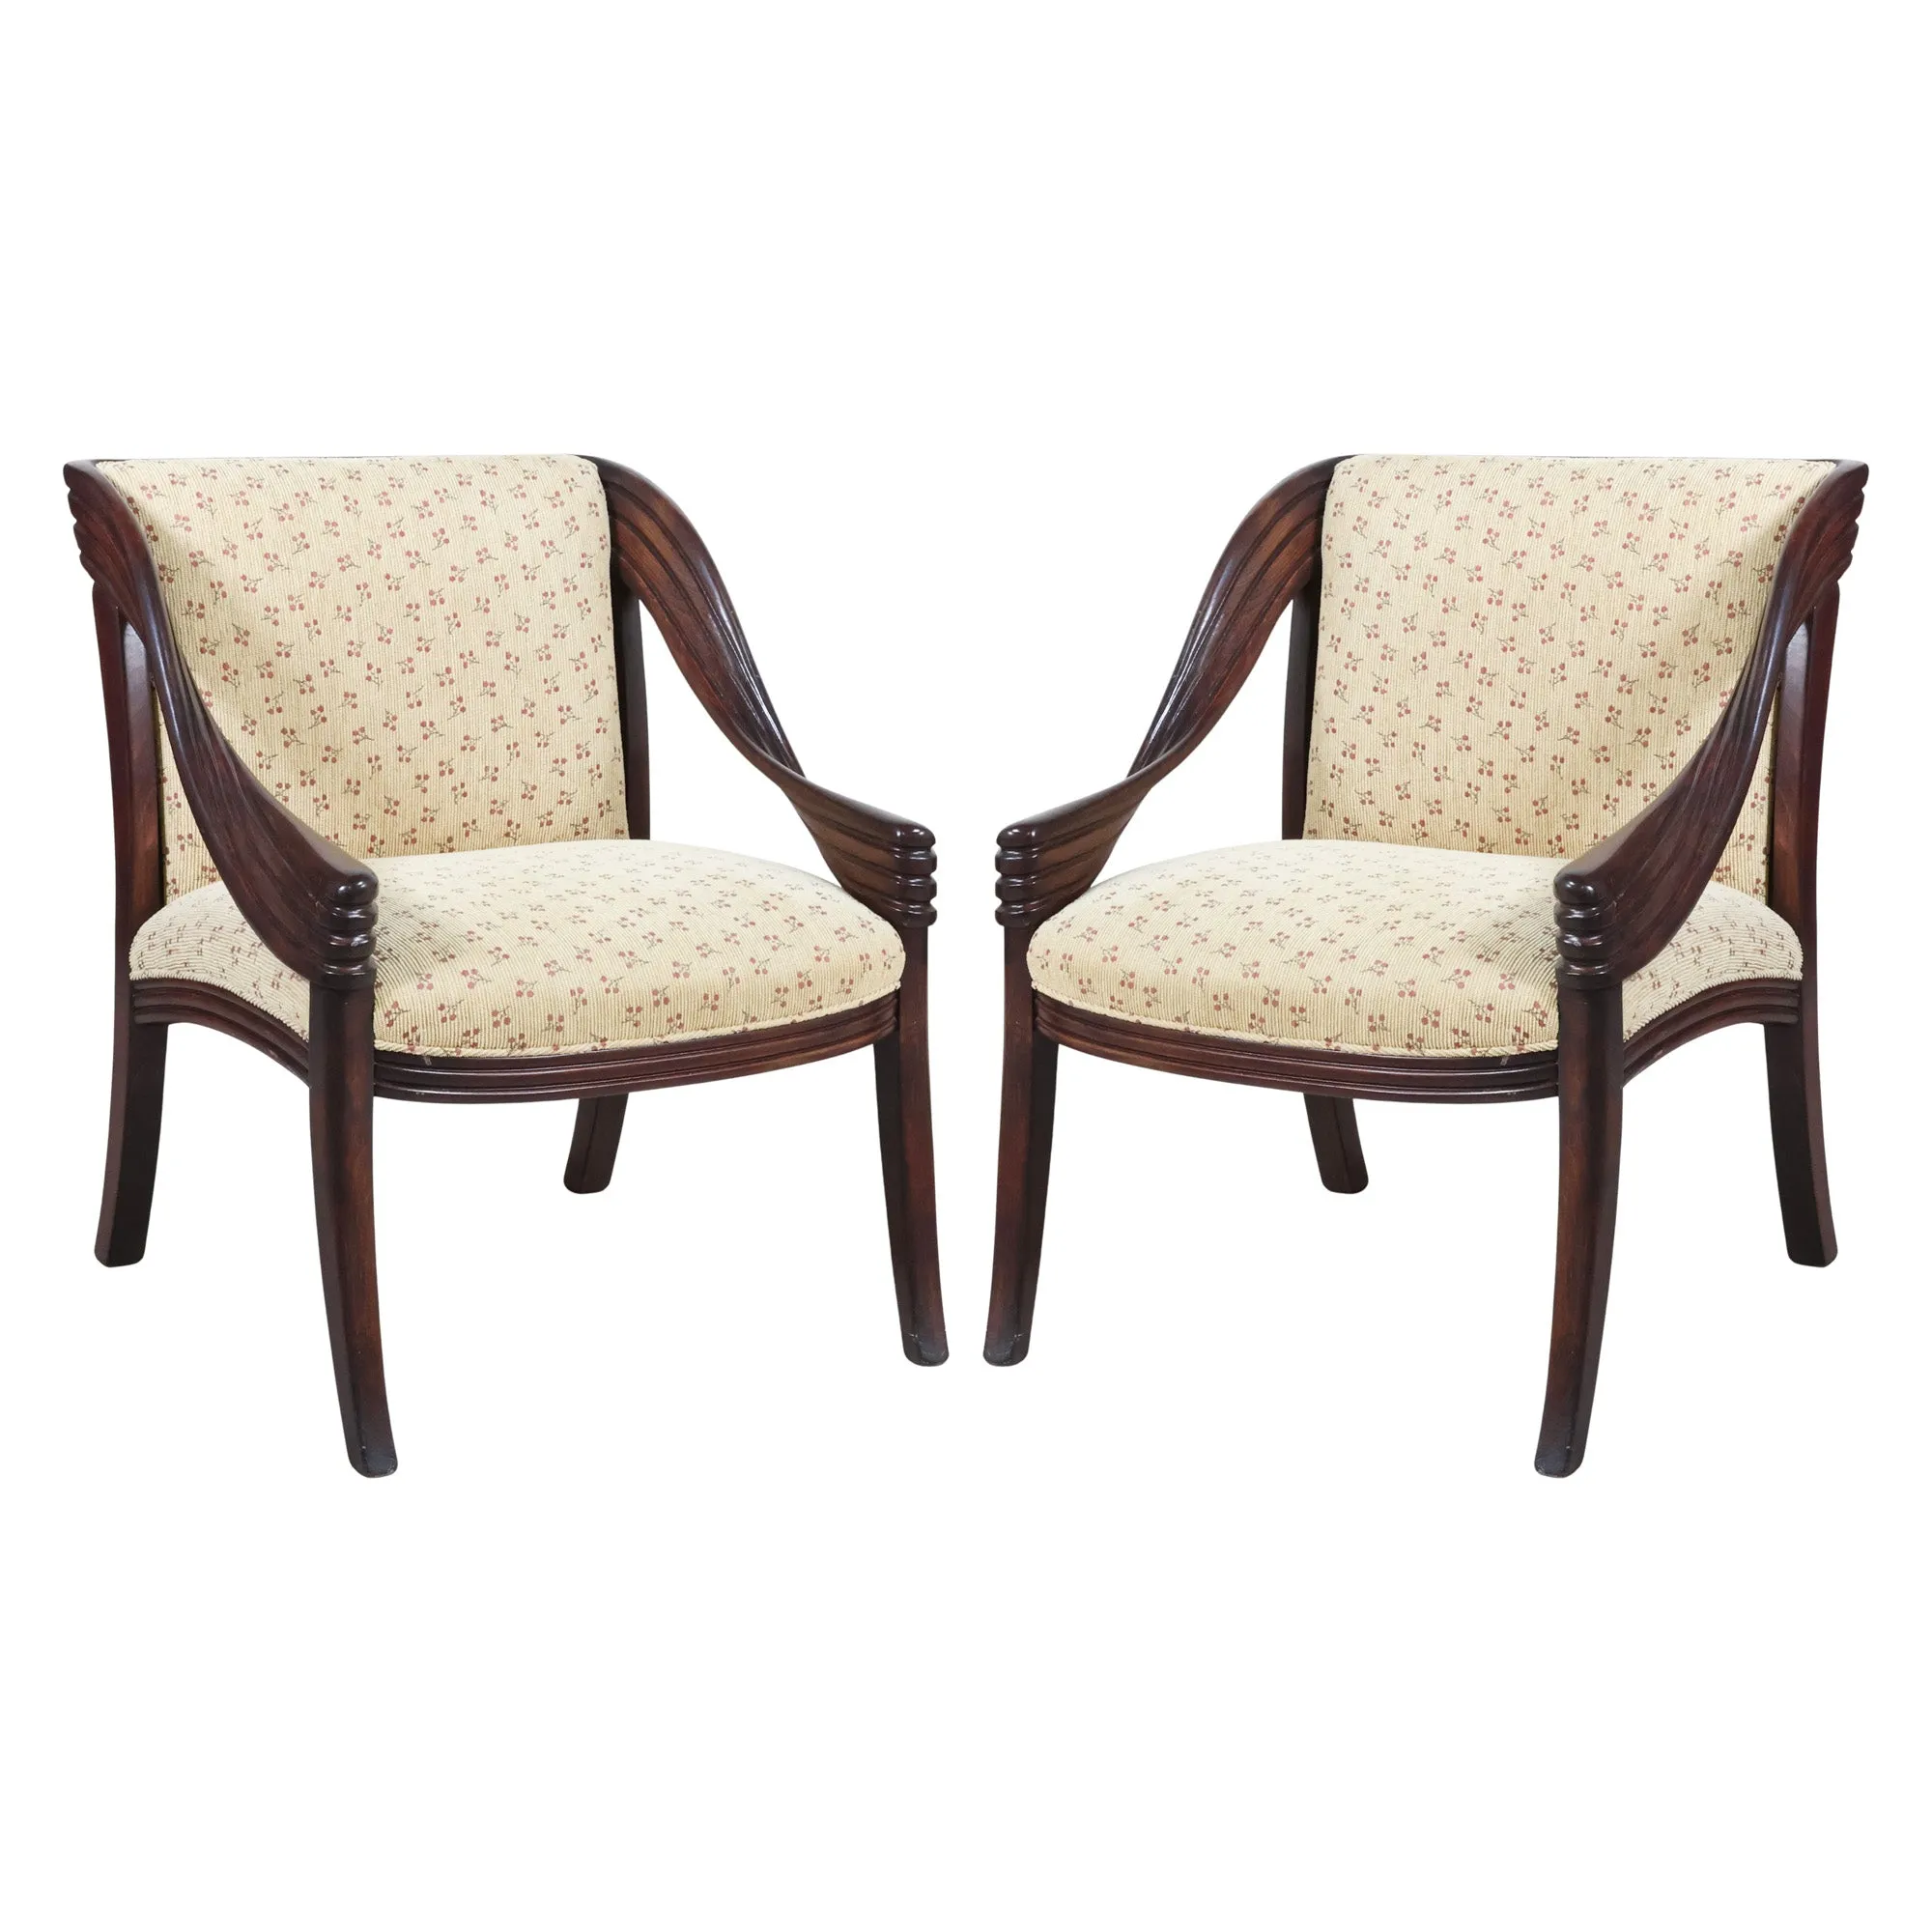 Pair of Curved Arm Chairs